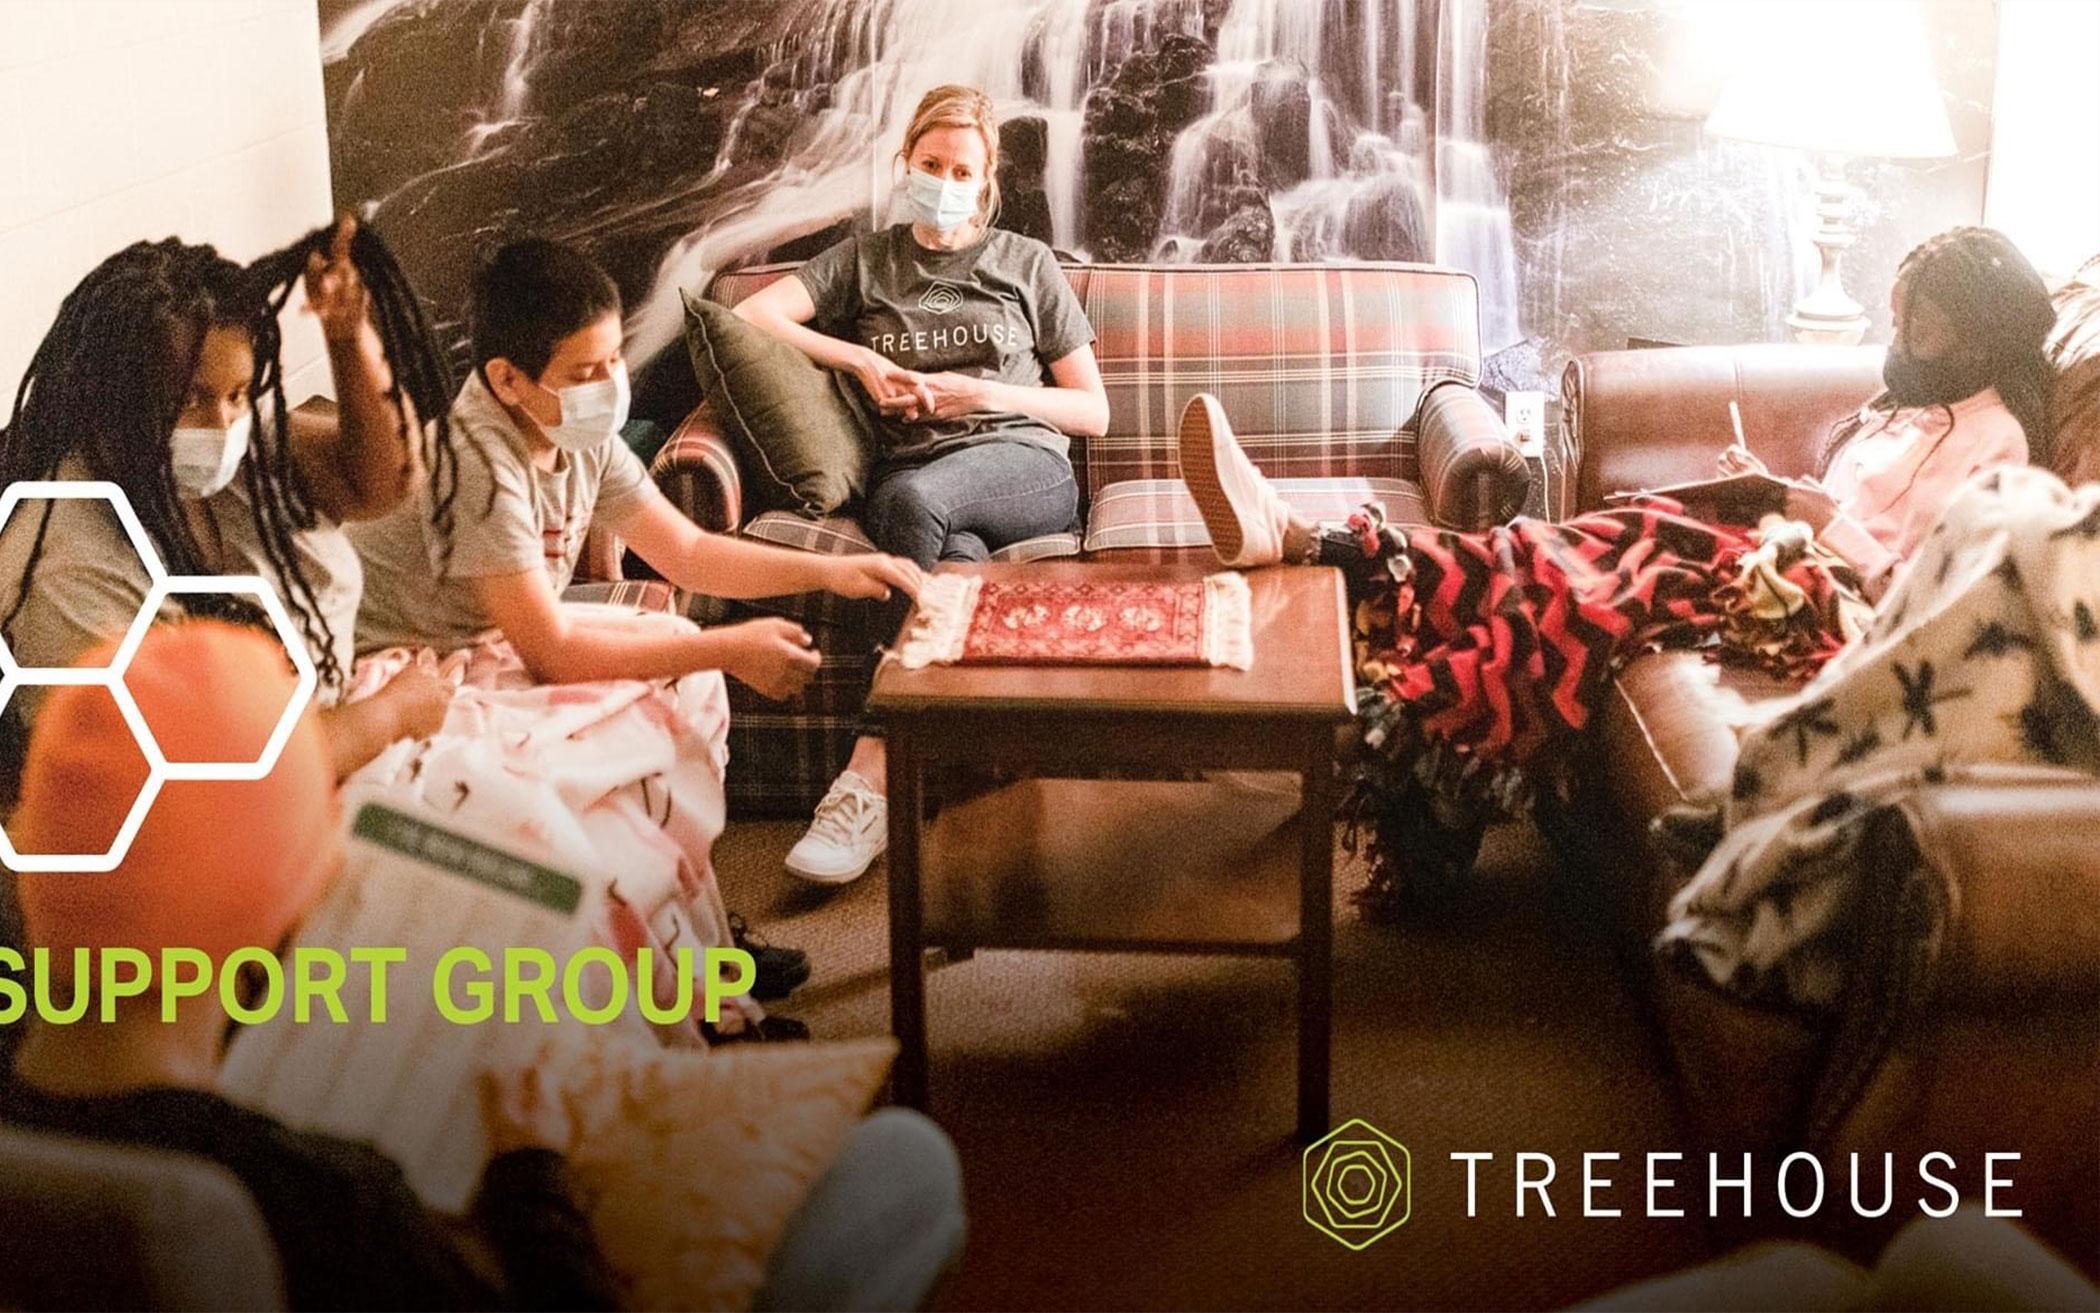 Tuesday support groups and Thursday Bible study groups form the basis of the TreeHouse ministry to teens. (Photo courtesy of TreeHouse.)